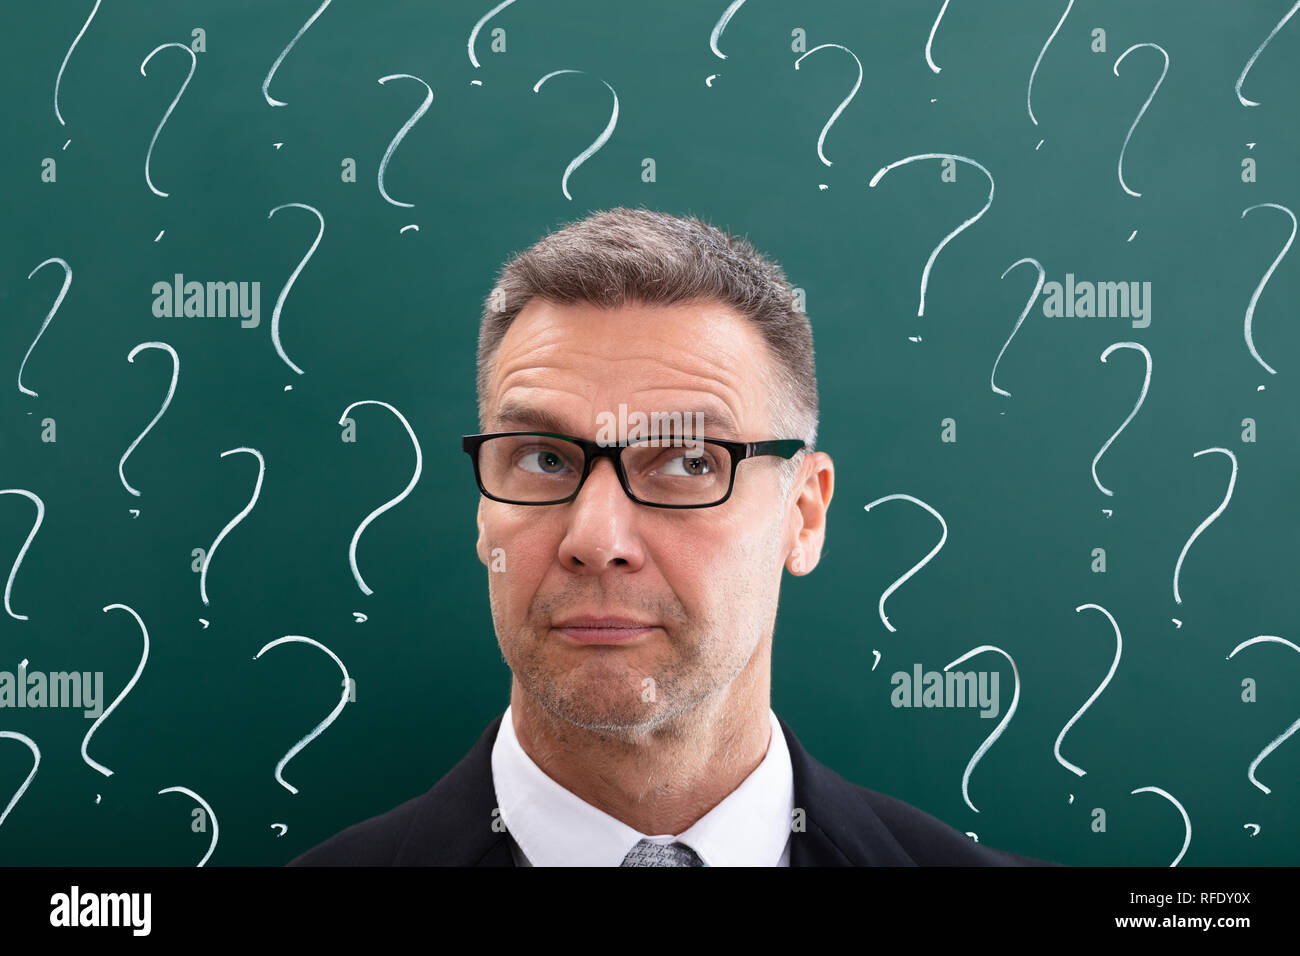 Thinking Mature Man In Front Of Question Marks Drawn On Chalkboard Stock Photo